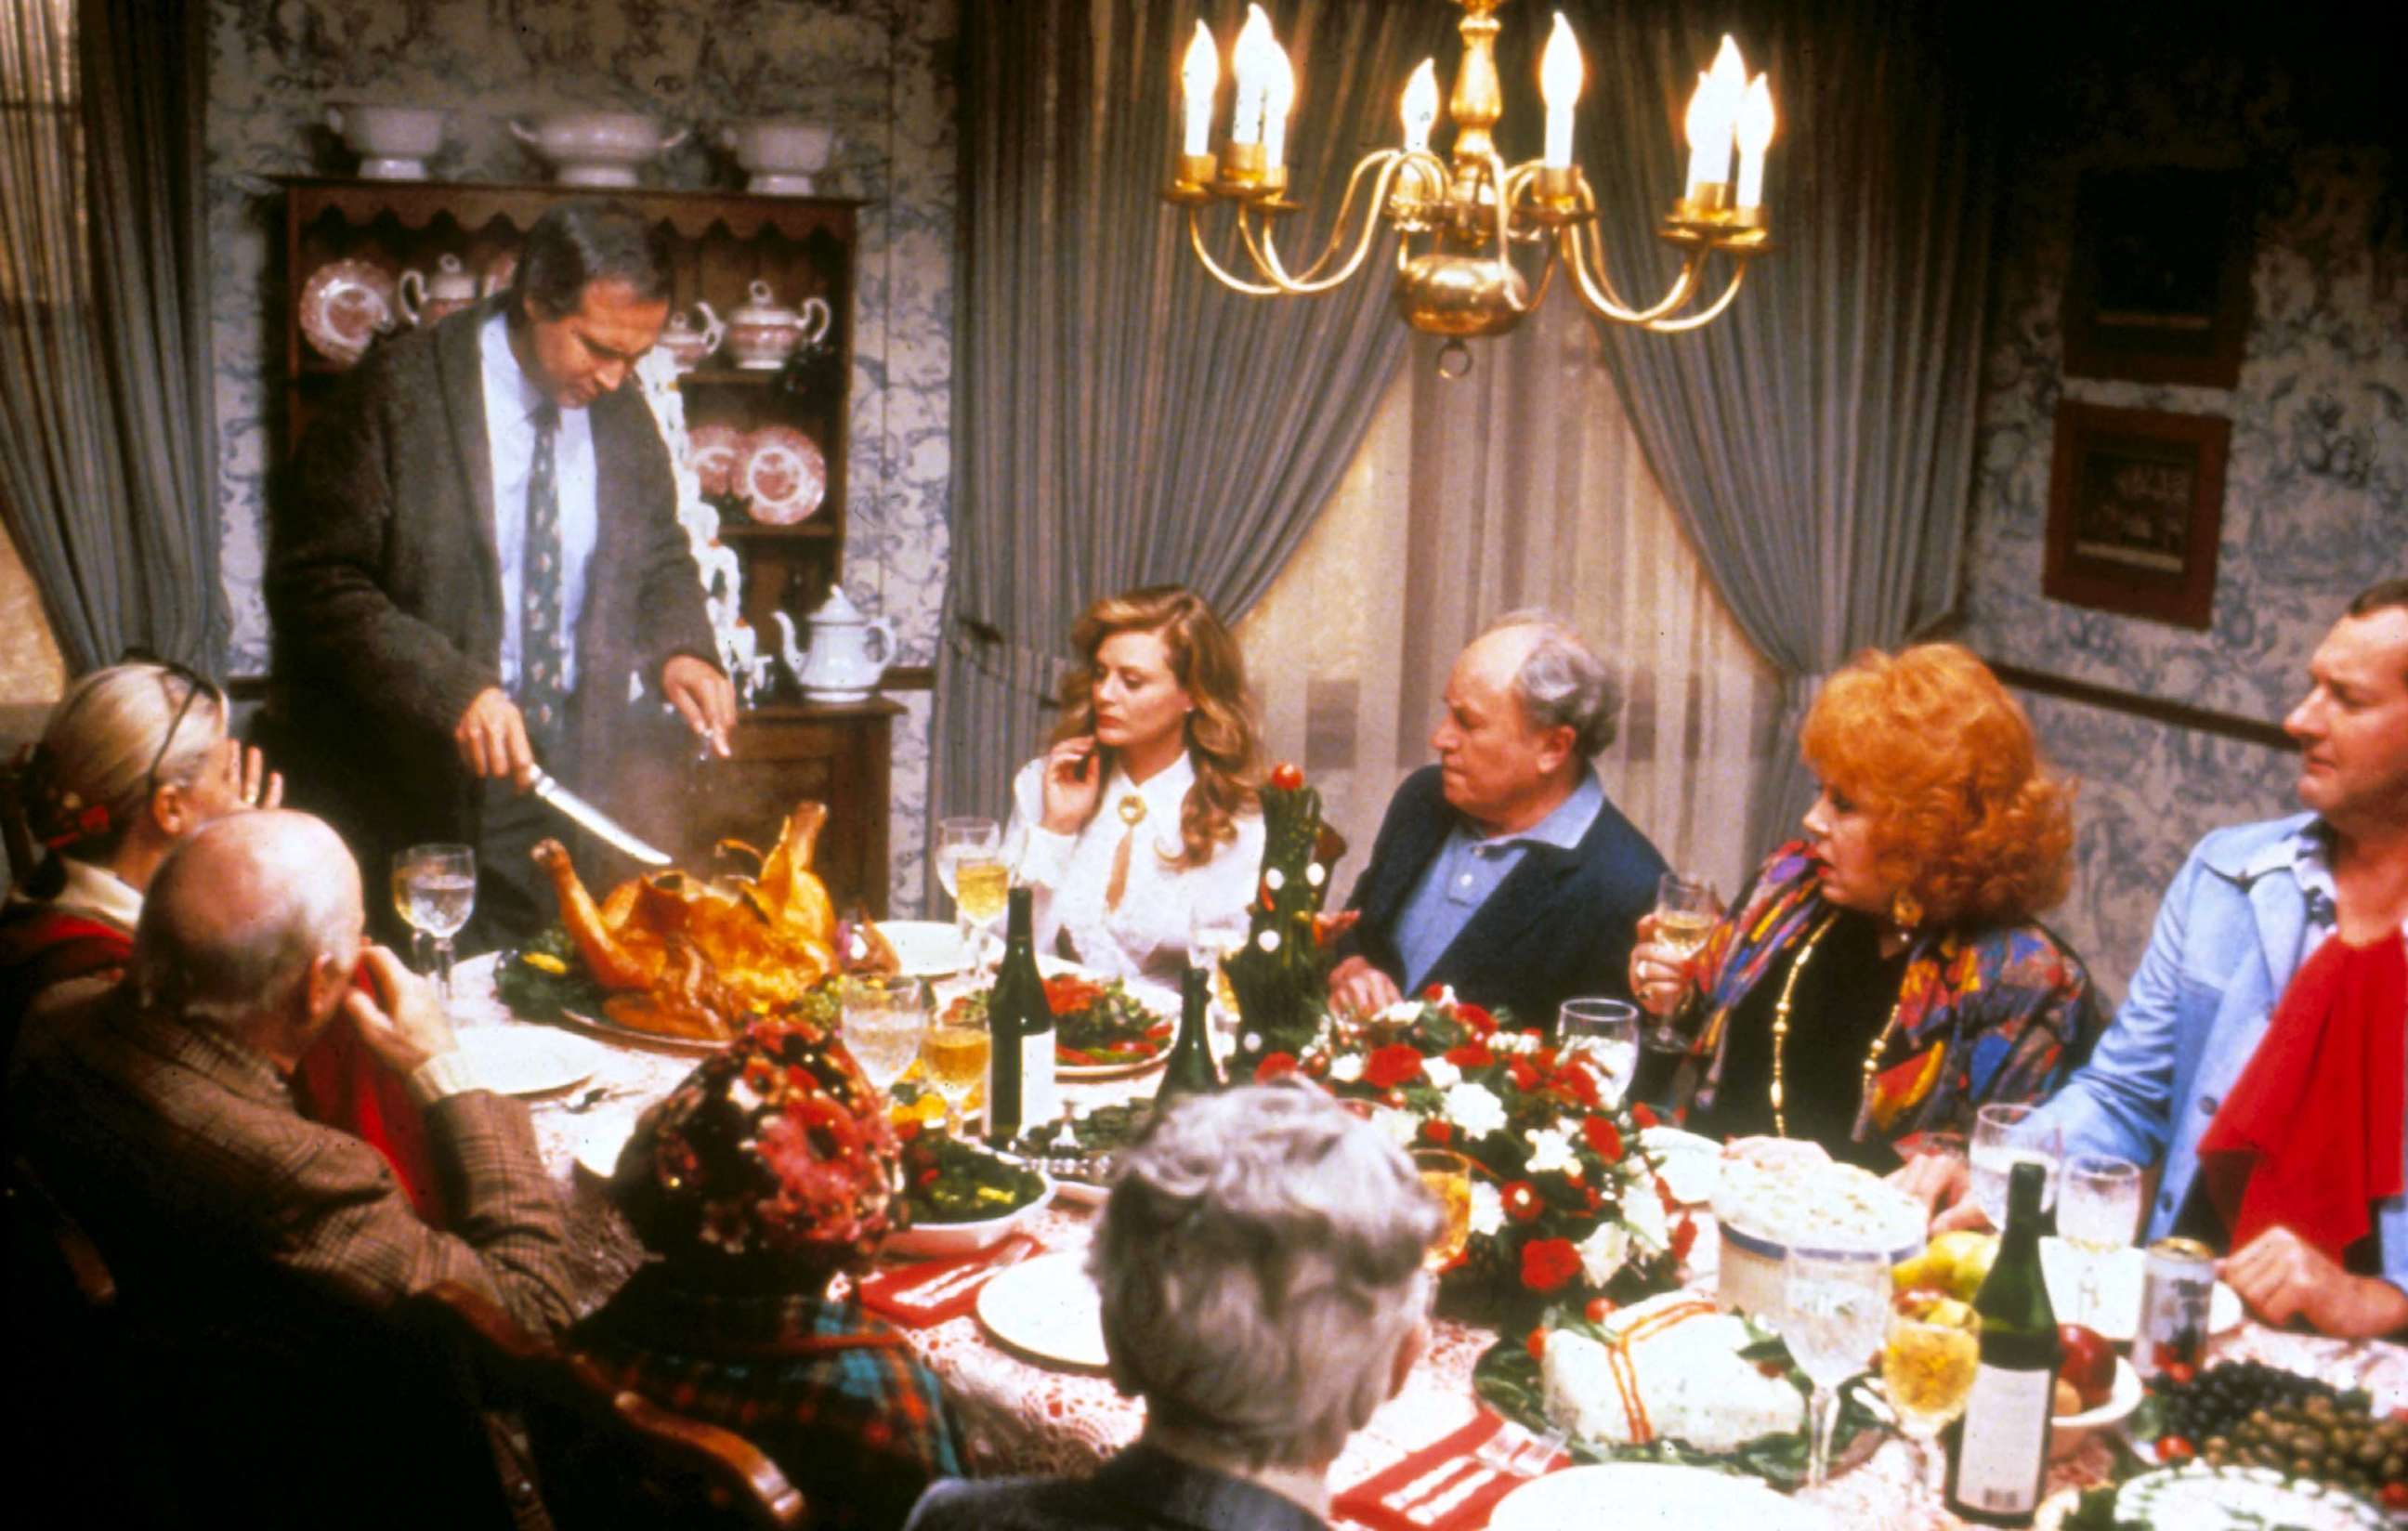 PHOTO: Scene from "National Lampoon's Christmas Vacation."